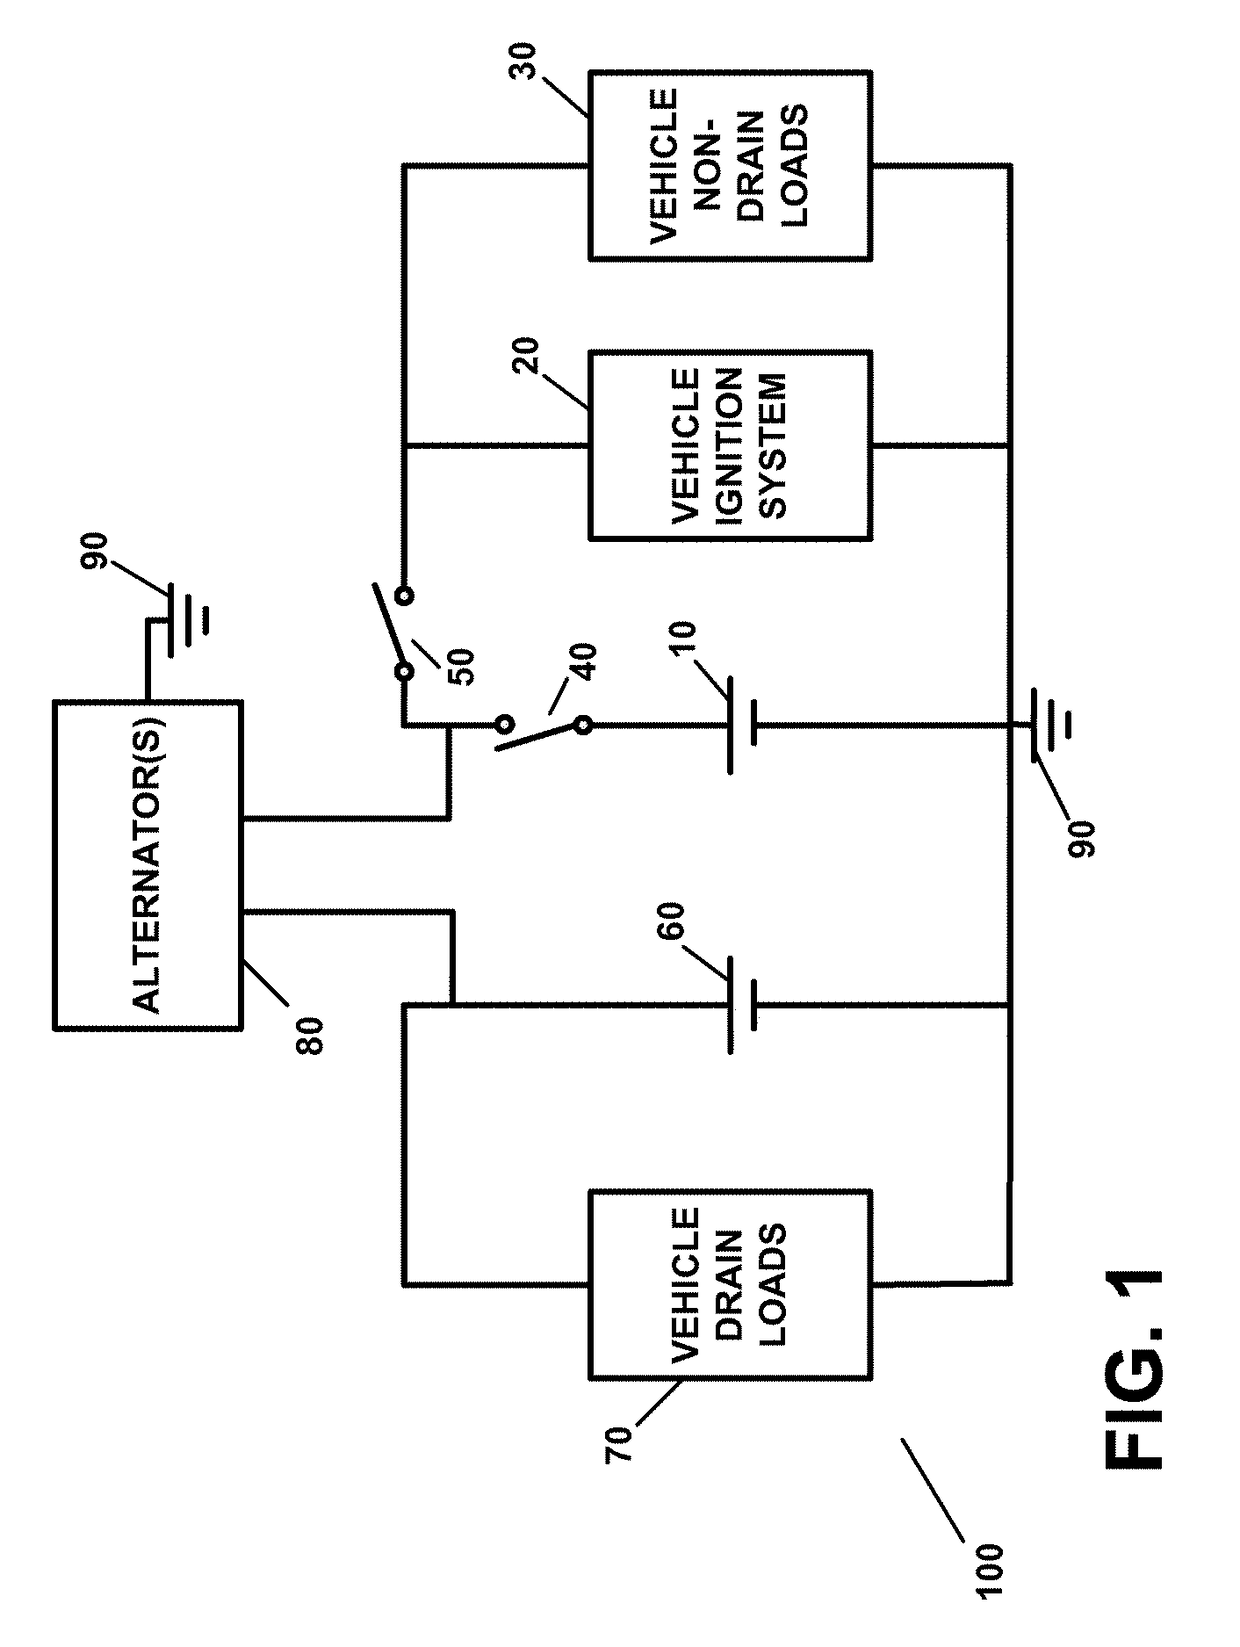 Battery power management apparatus and method